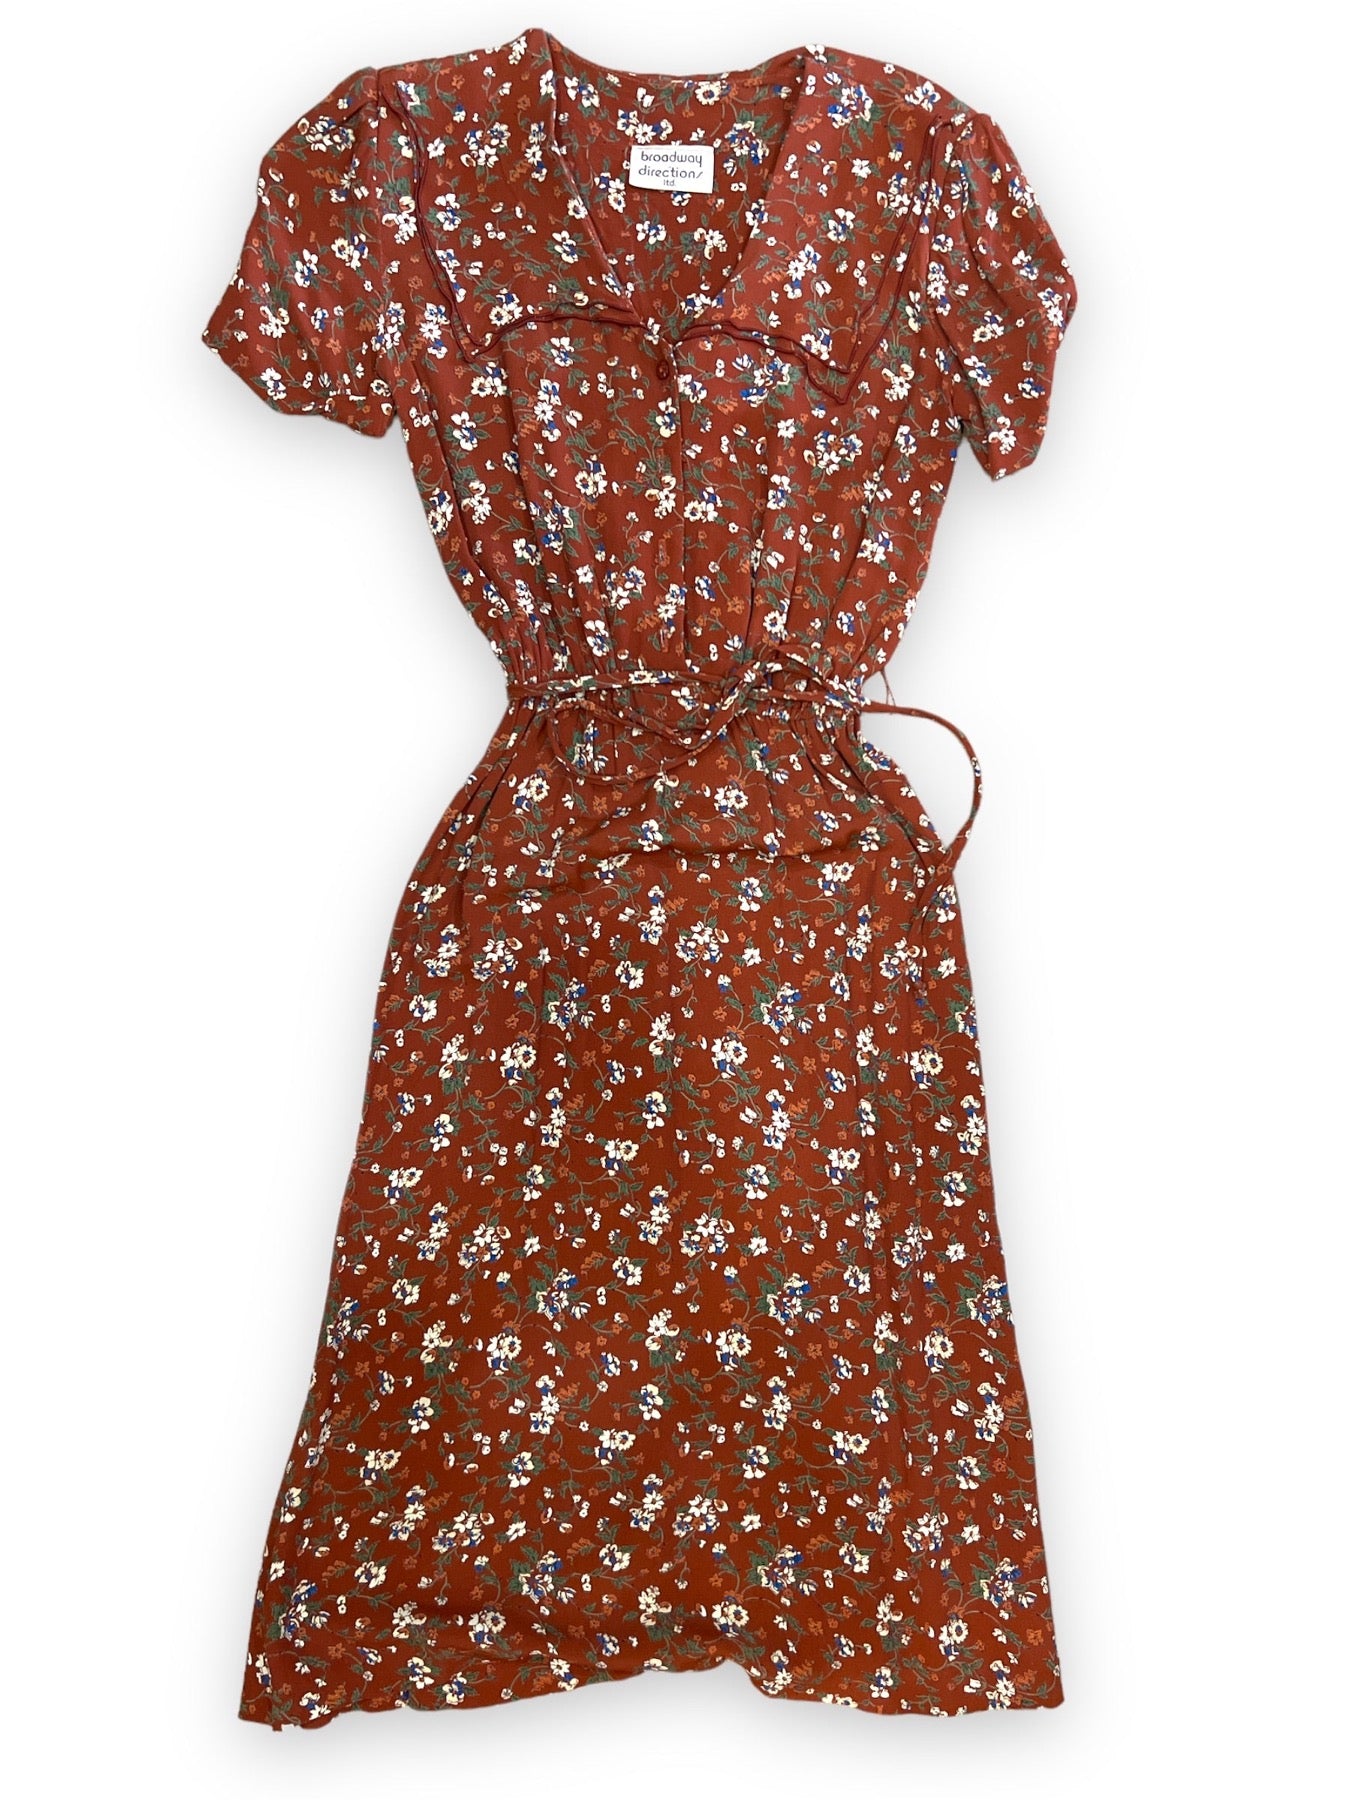 BROADWAY EDITIONS RUST FLORAL DRESS